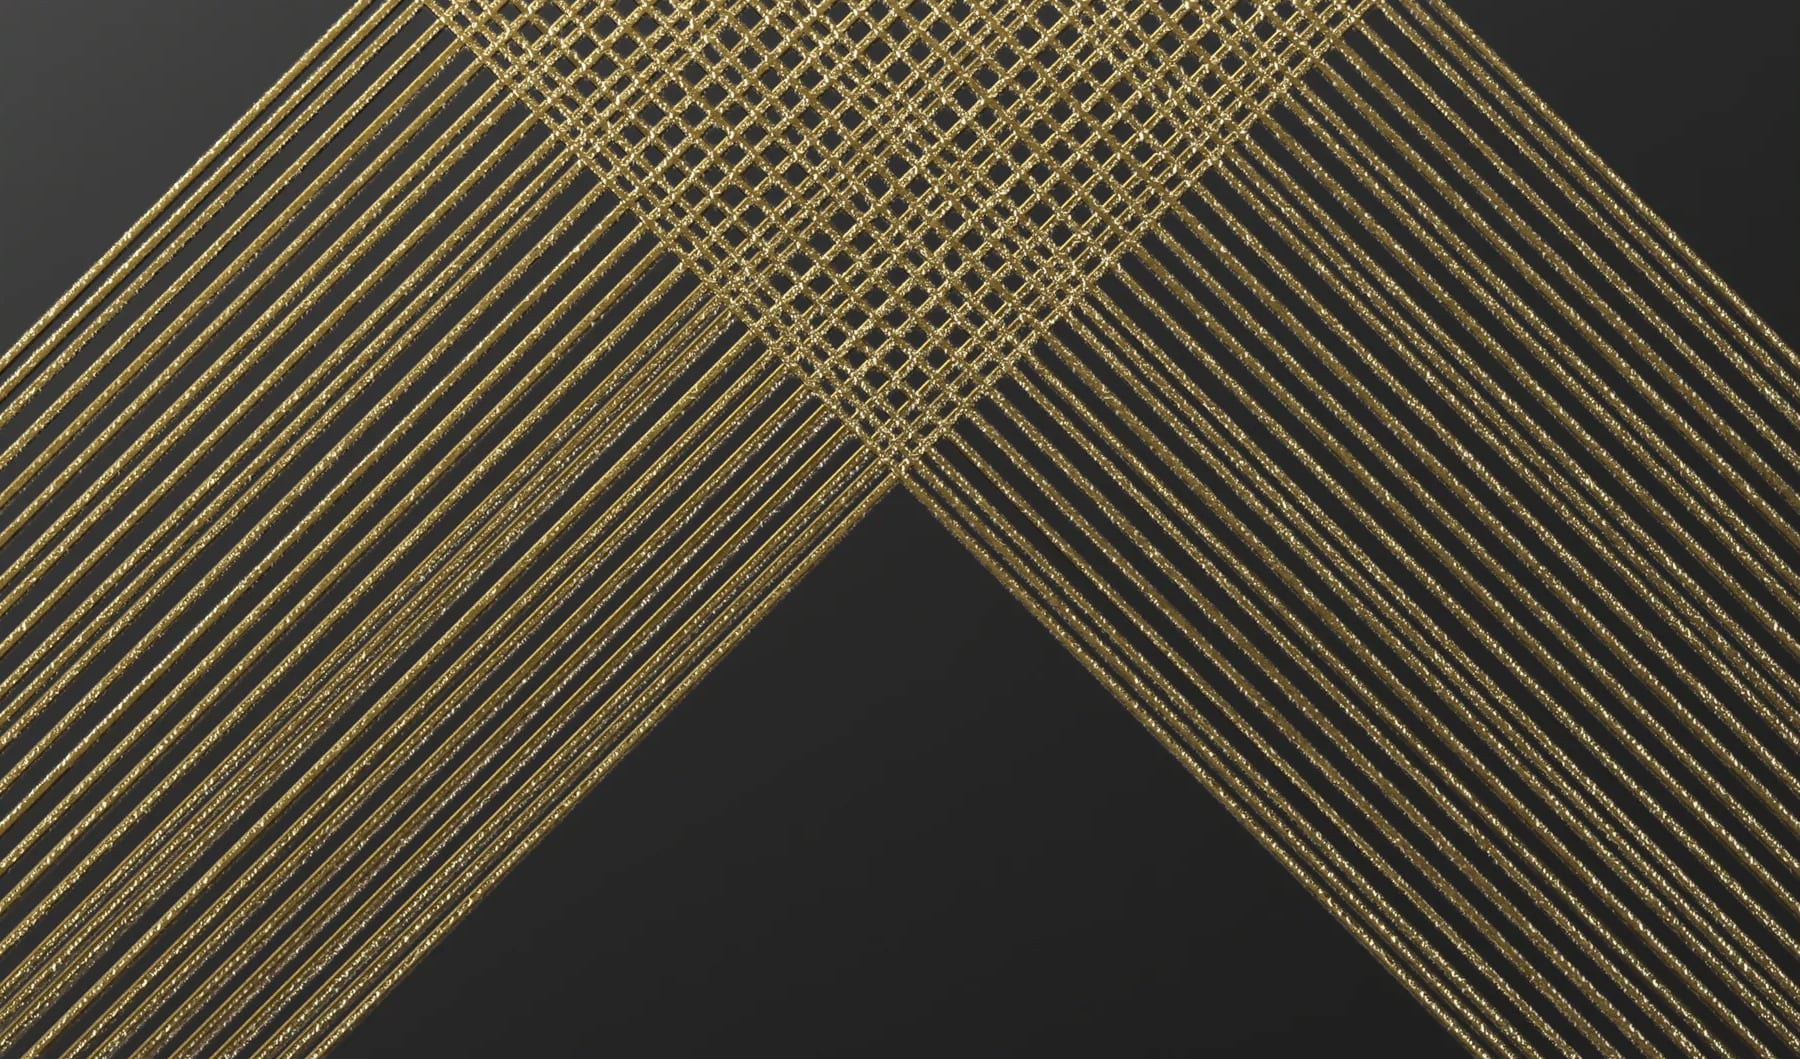 Luxurious gold metallic tile with textured stripes, perfect for an opulent and glamorous design feature